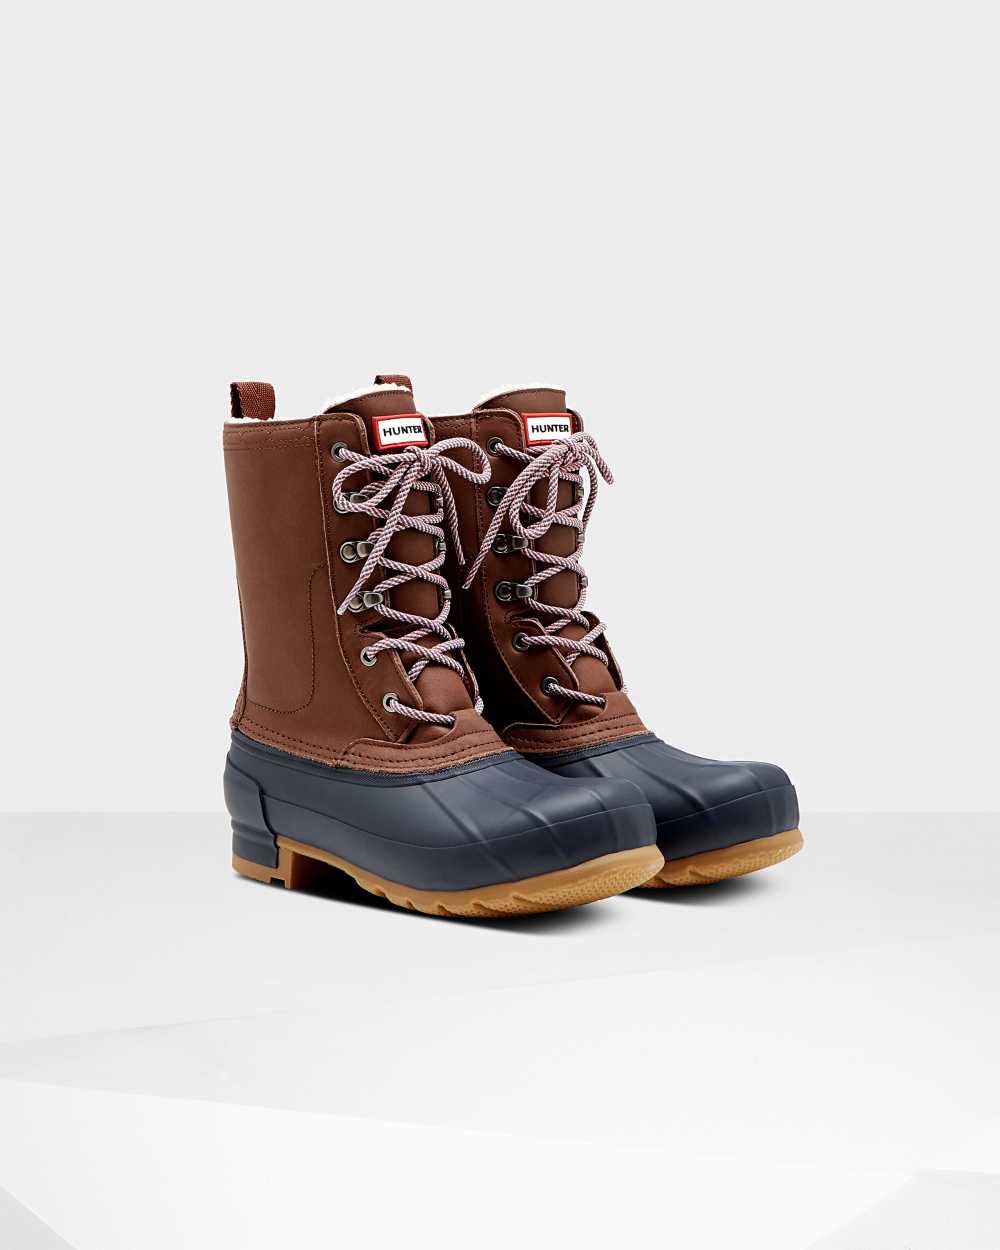 Sale Hunter Original Insulated Pac Winter Boots Brown/Navy Clearance